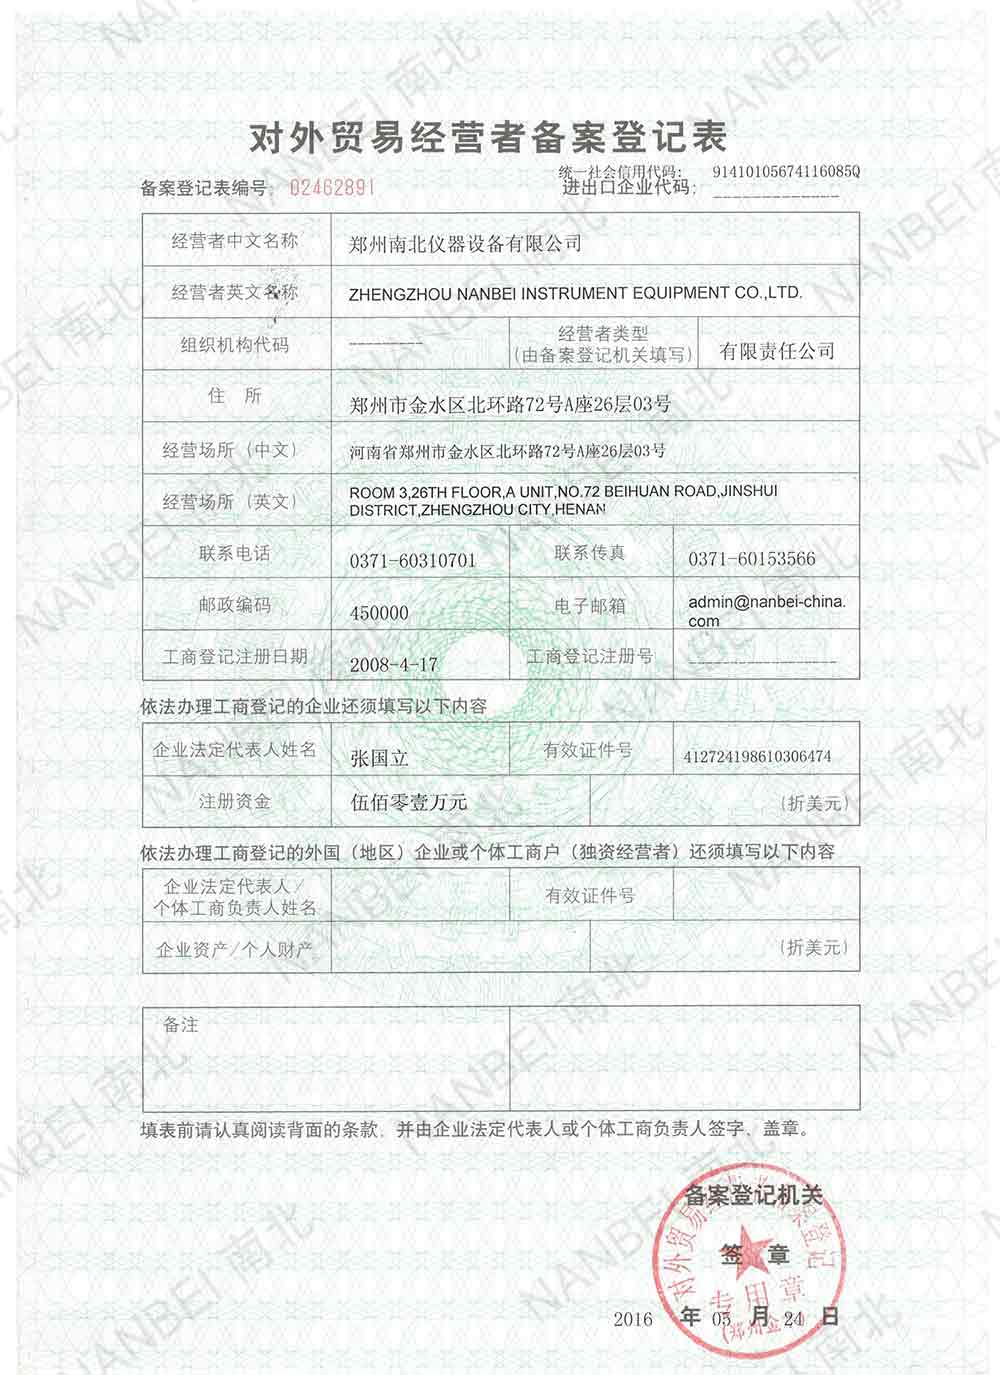 The Registration From for Foreign Trade Manager